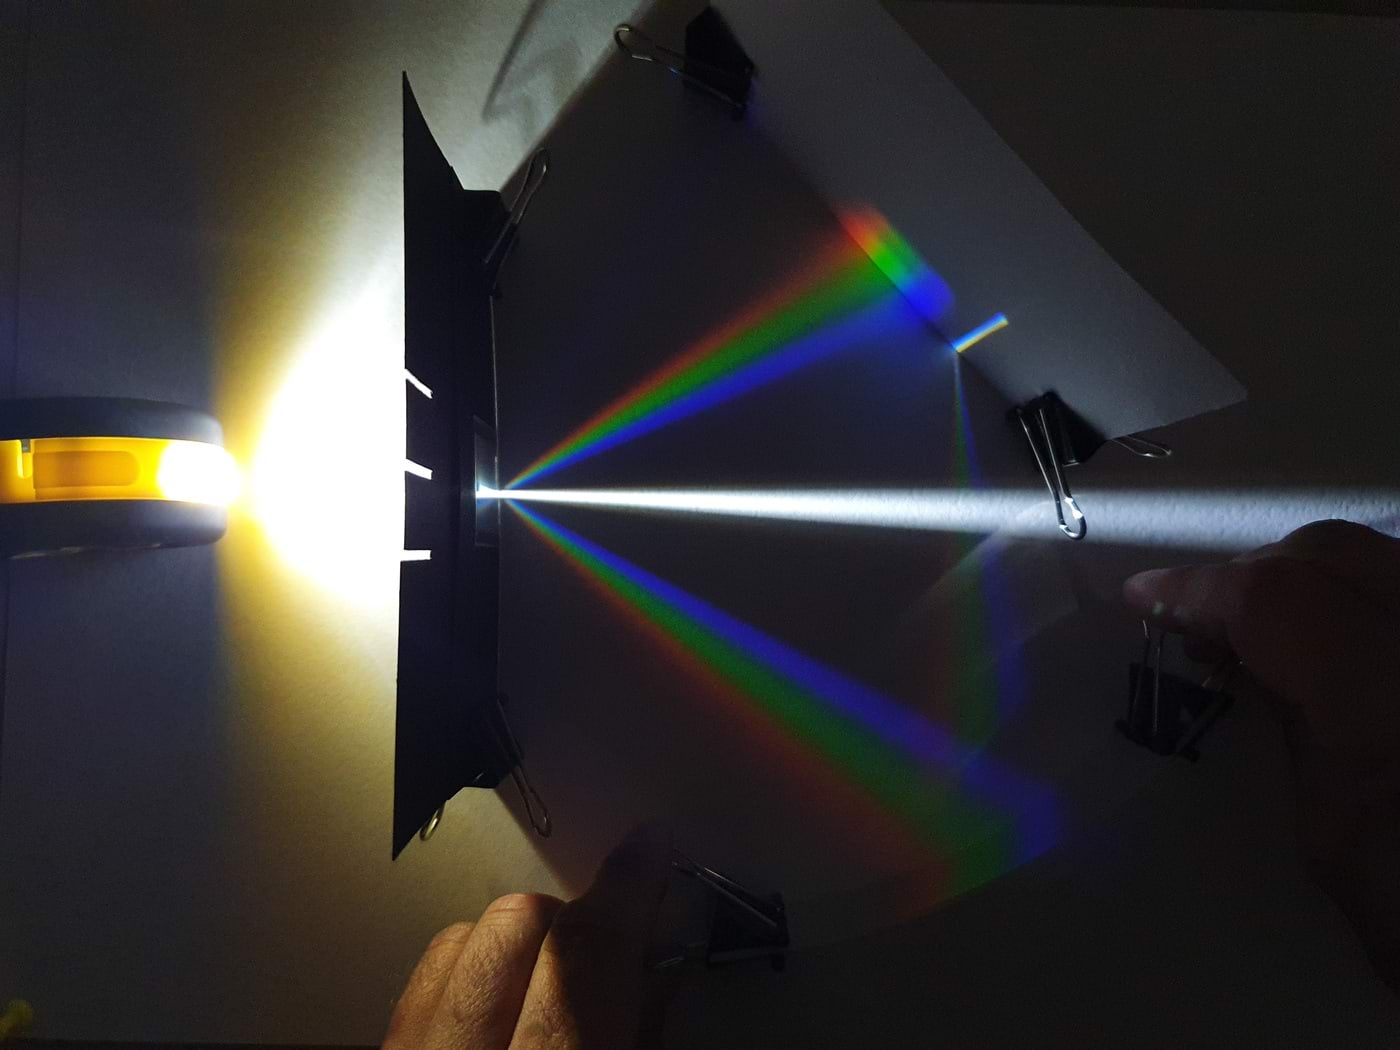 Decomposing white light into a spectrum and recombining it into white light